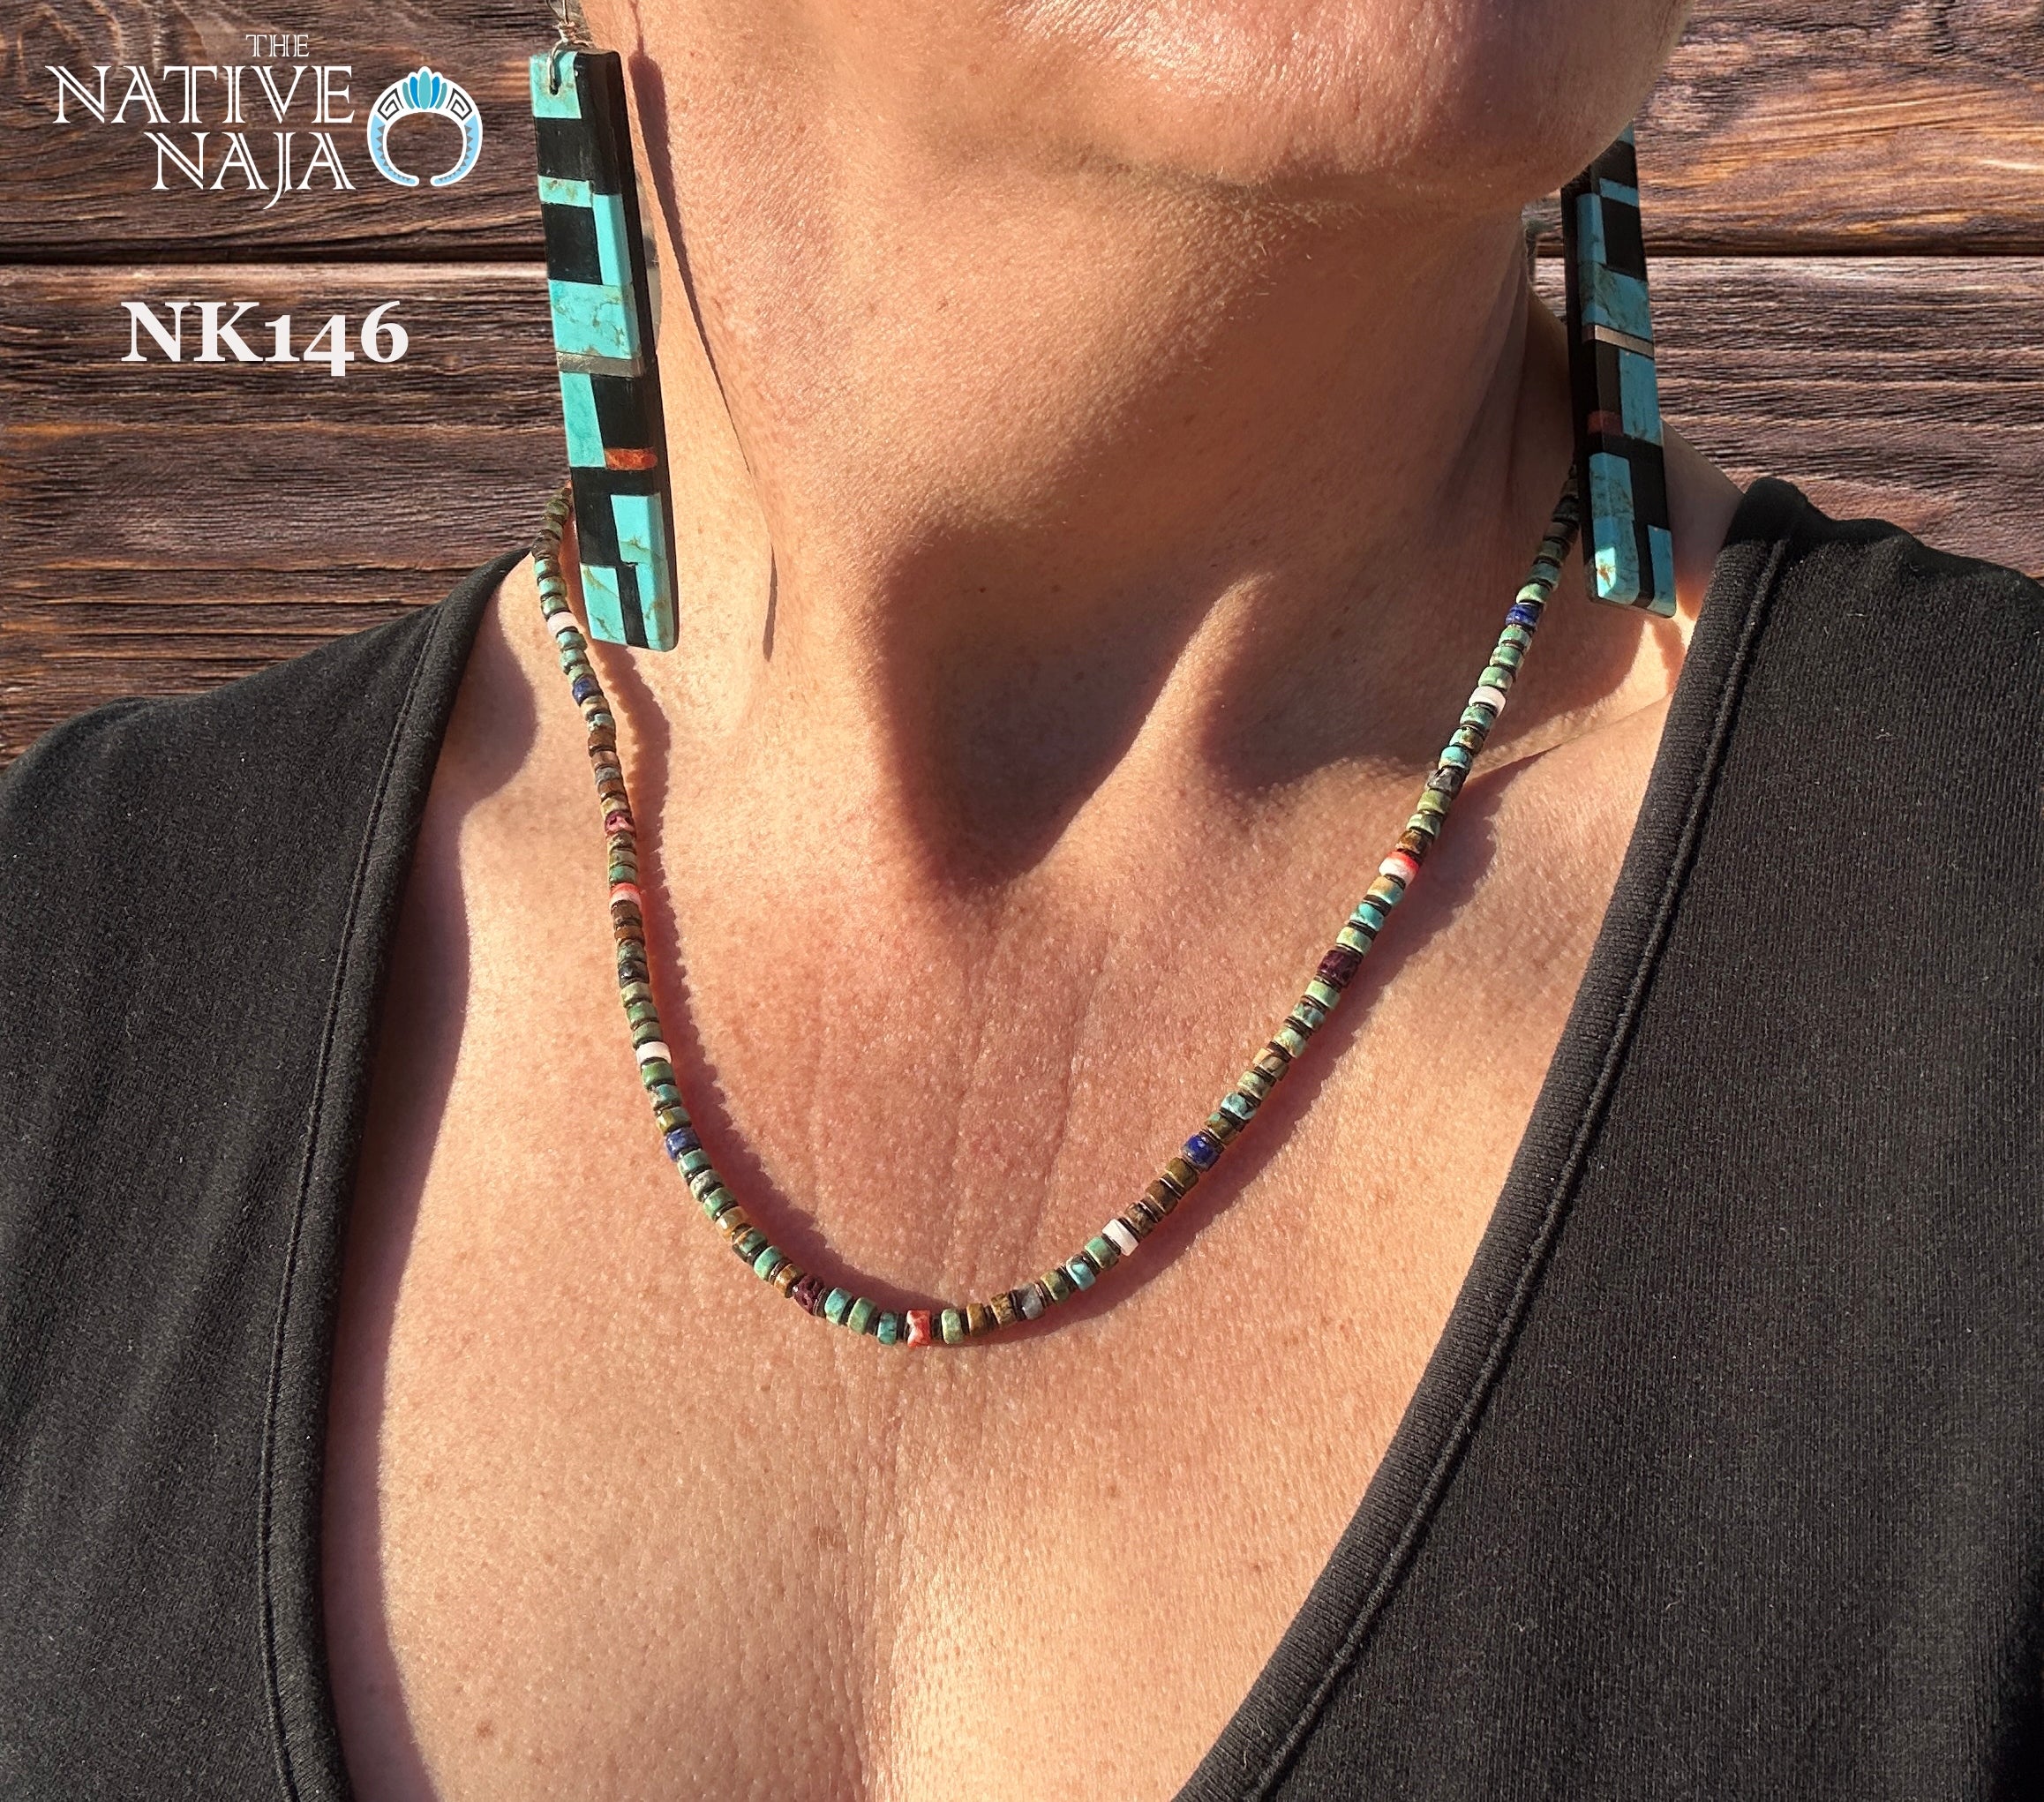 Navajo 21" Multi Stone Turquoise, Spiny Oyster, Lapis, Mother of Pearl Heishi Bead Necklace NK146